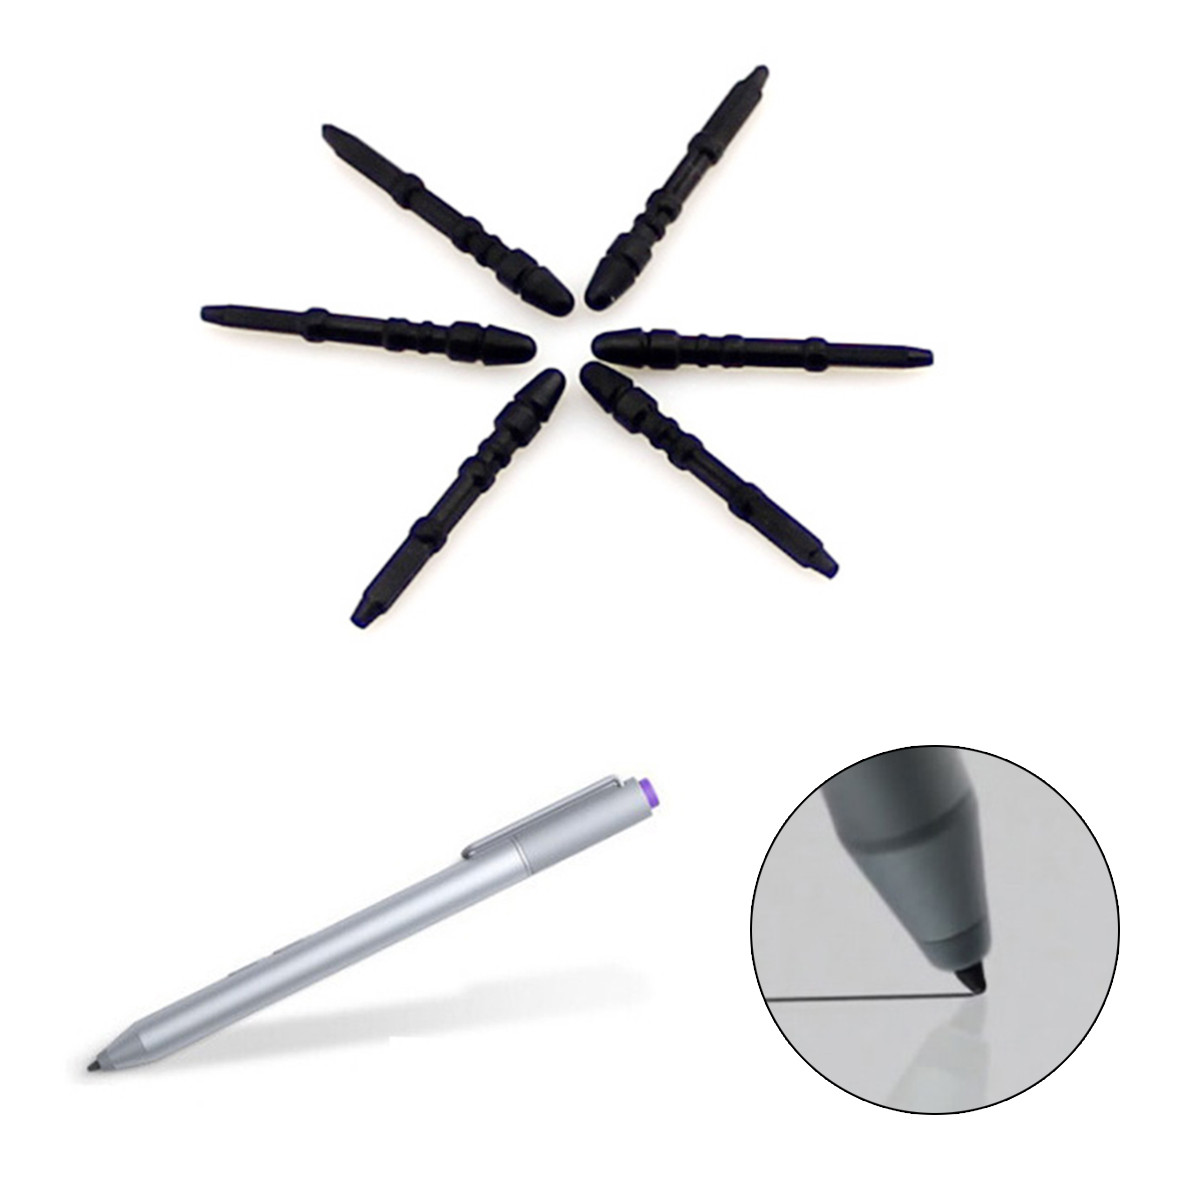 1pcs-Touch-Pen-Stylus-Tips-Refill-Replacement-for-Microsoft-Surface-Pro-3-1165677